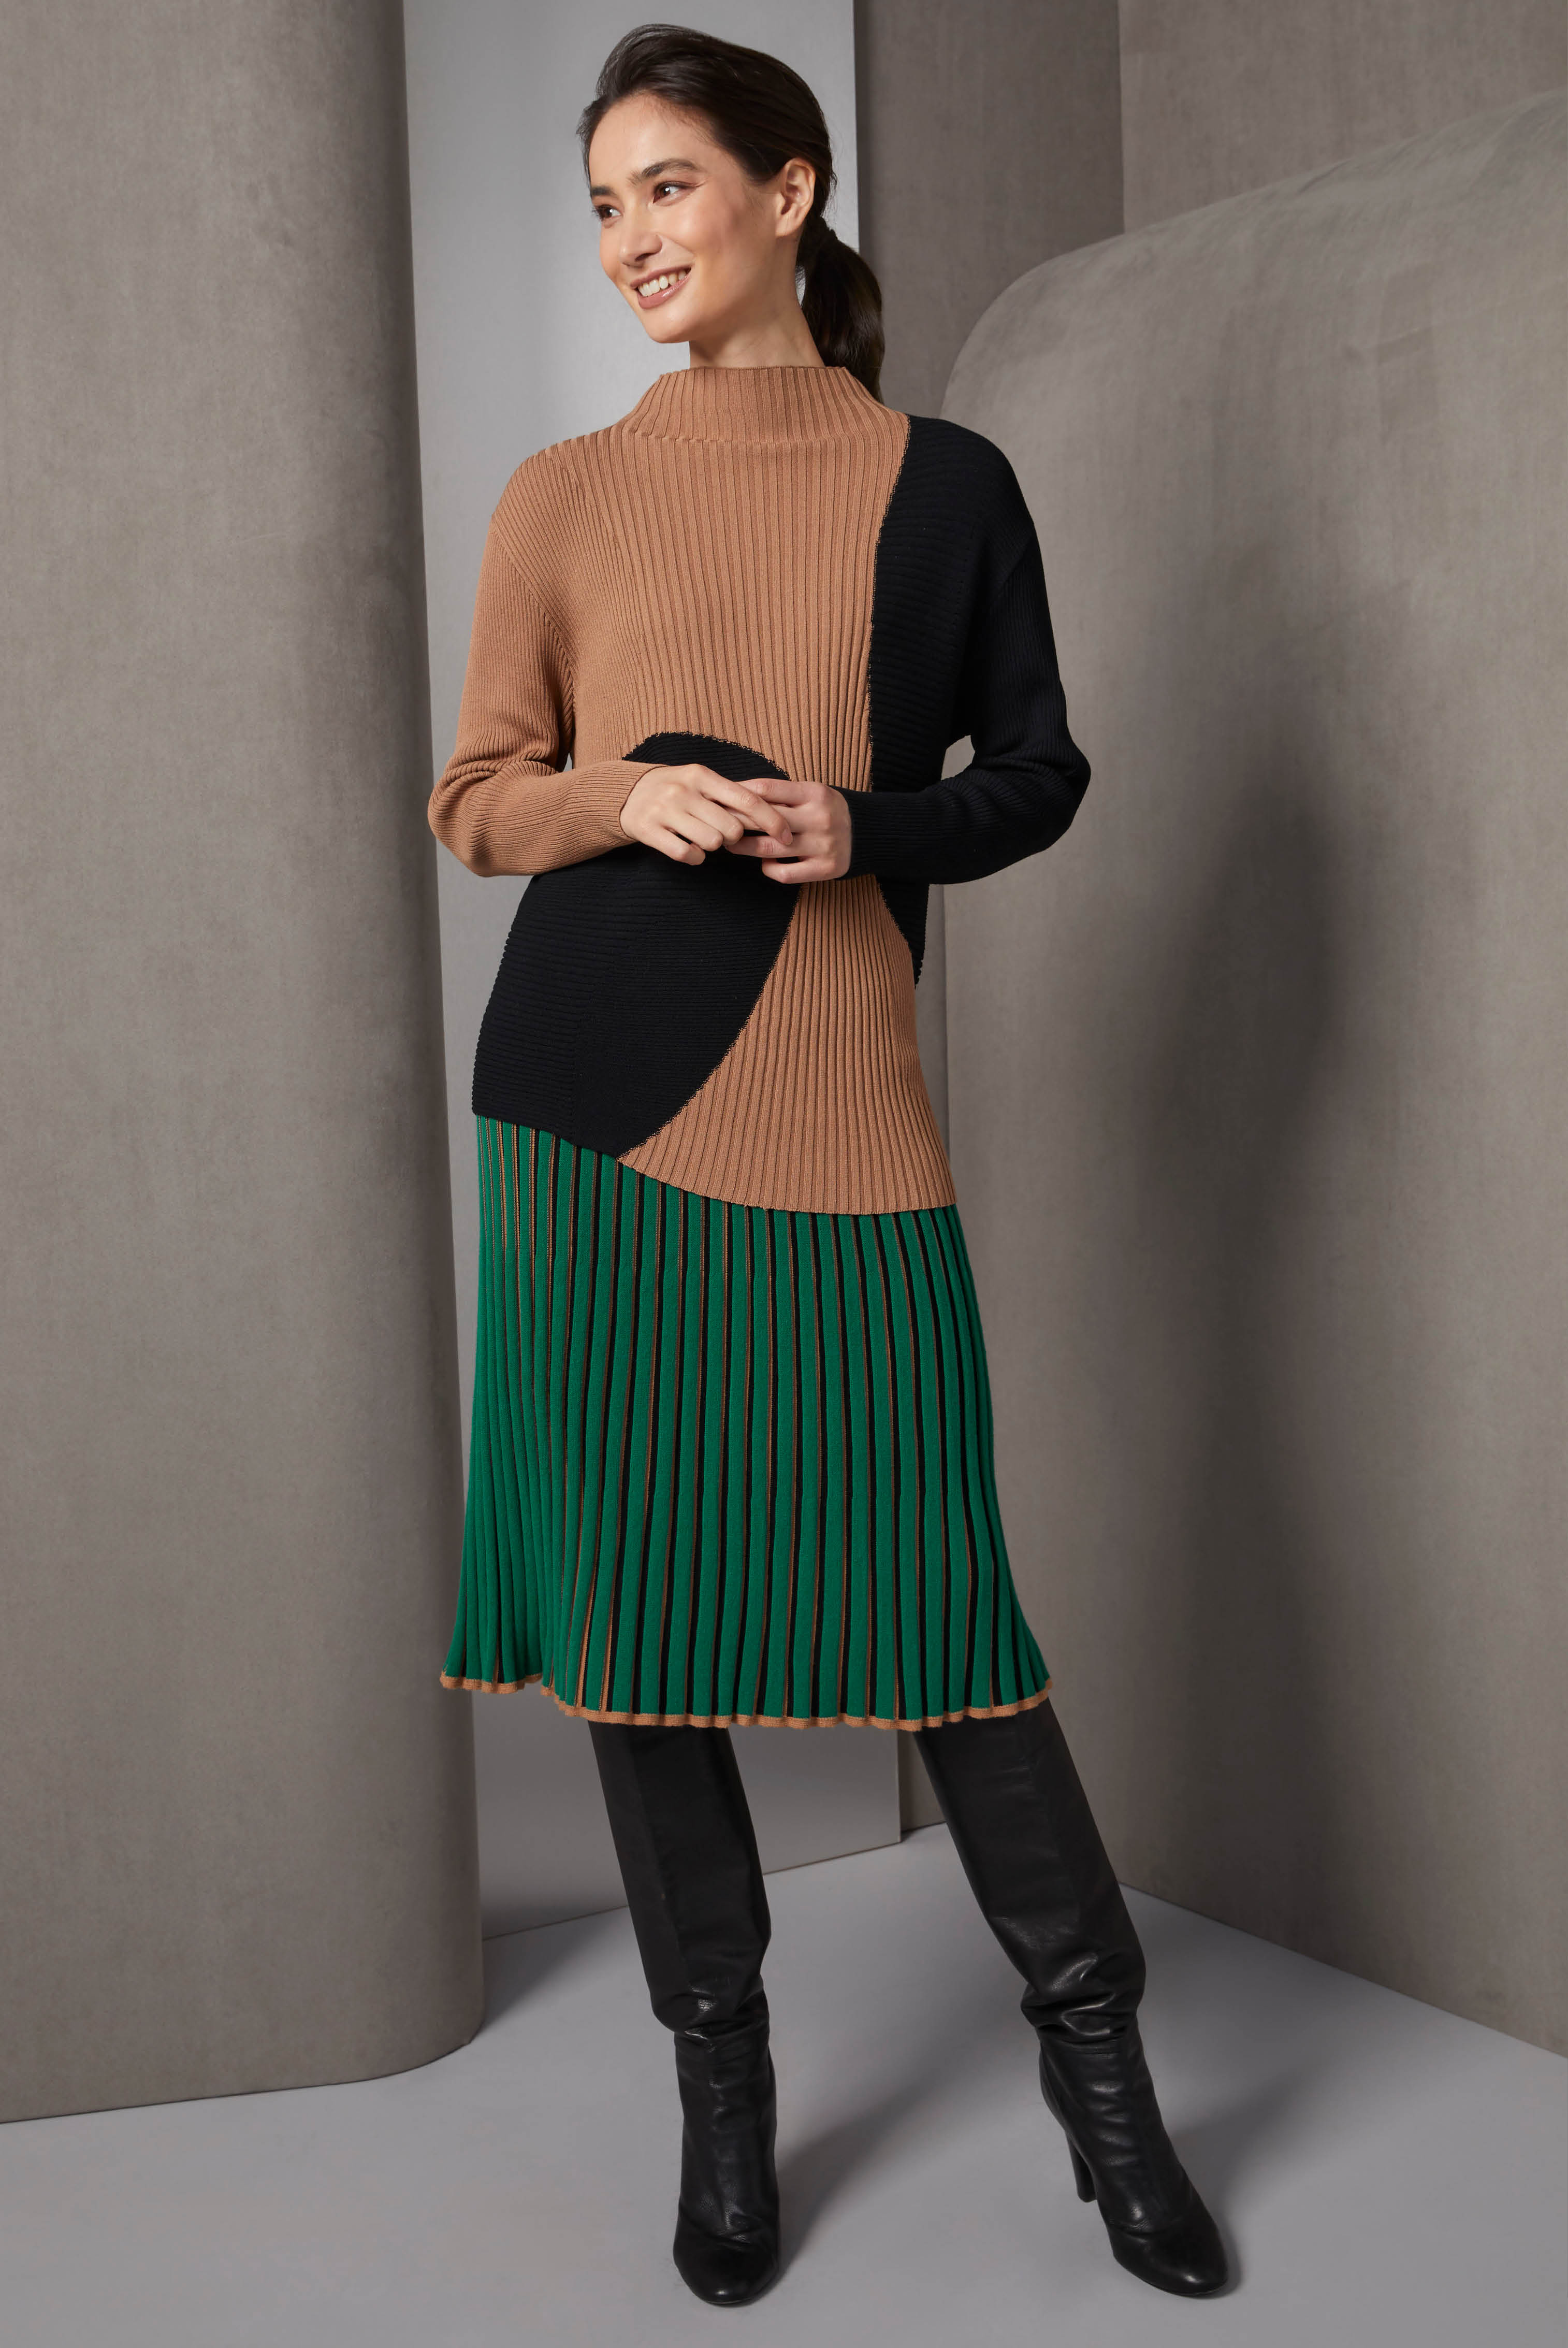 Striking free-form intarsia knit colorblock sweater, featuring a curvy asymmetrical hem in various lengths. This standout knit comes to life with multi-width, multi-directional ribs that add a dynamic texture. 